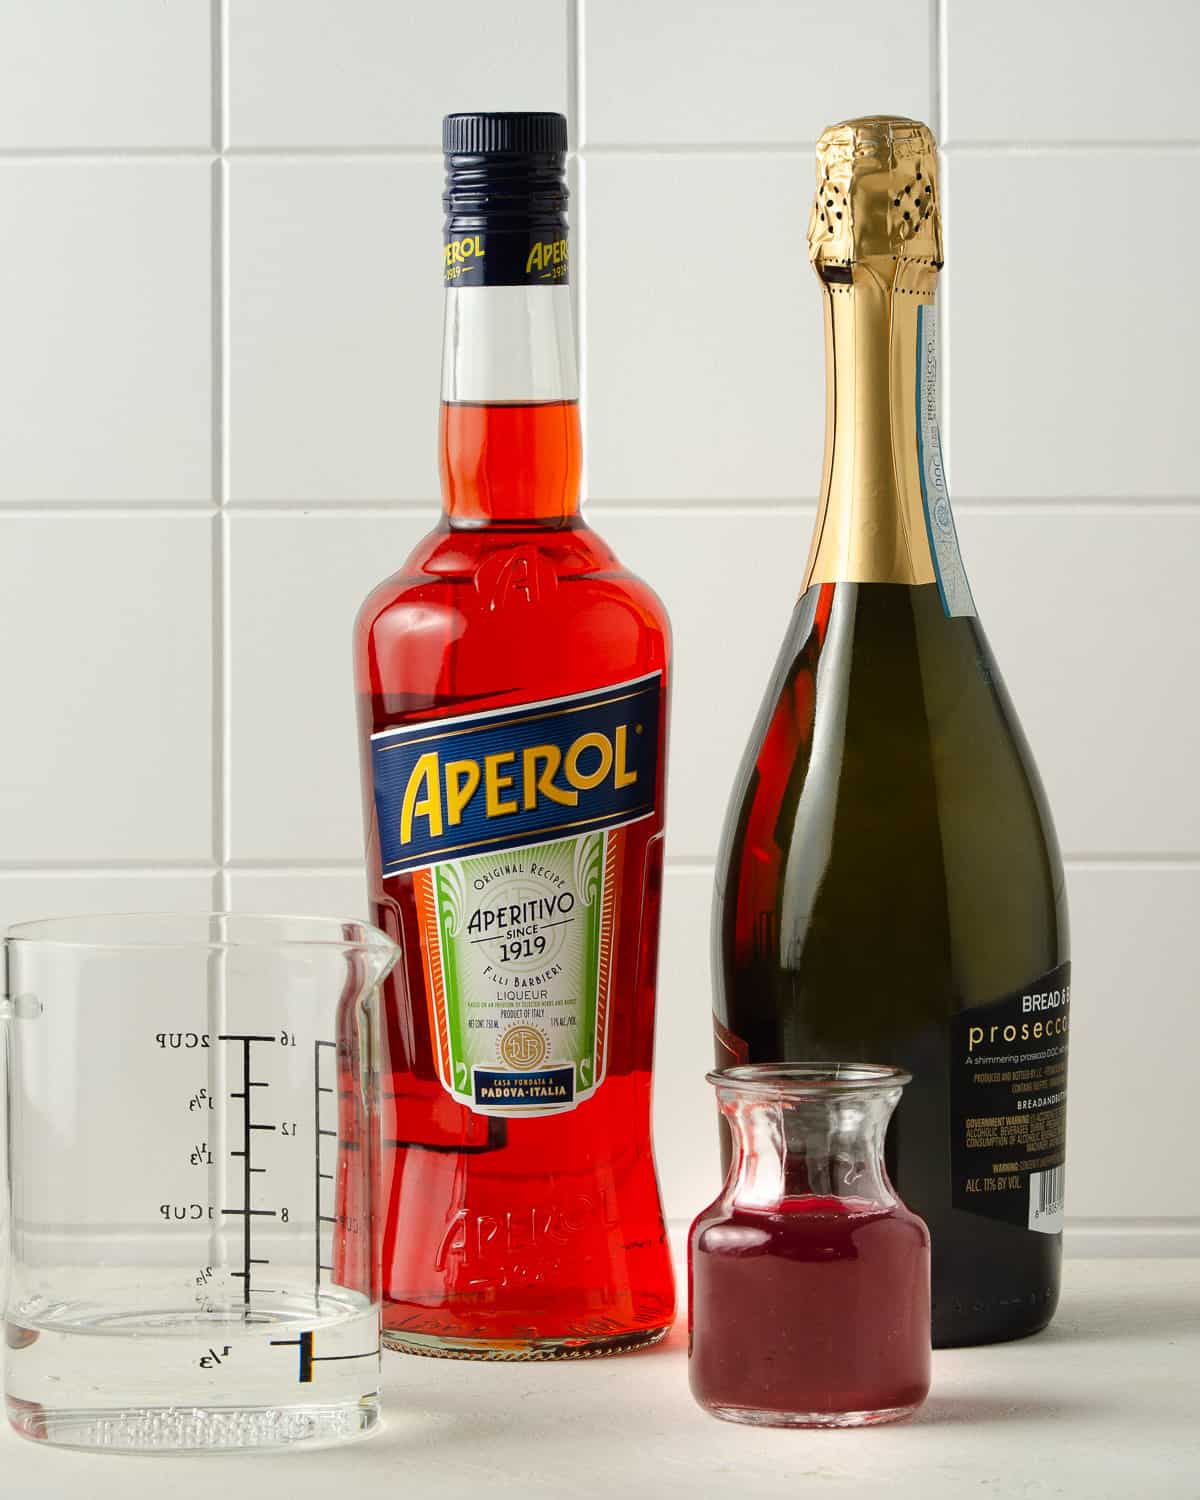 Ingredients for a Winter Aperol Spritz - Aperol, Prosecco, homemade cranberry simple syrup and club soda.